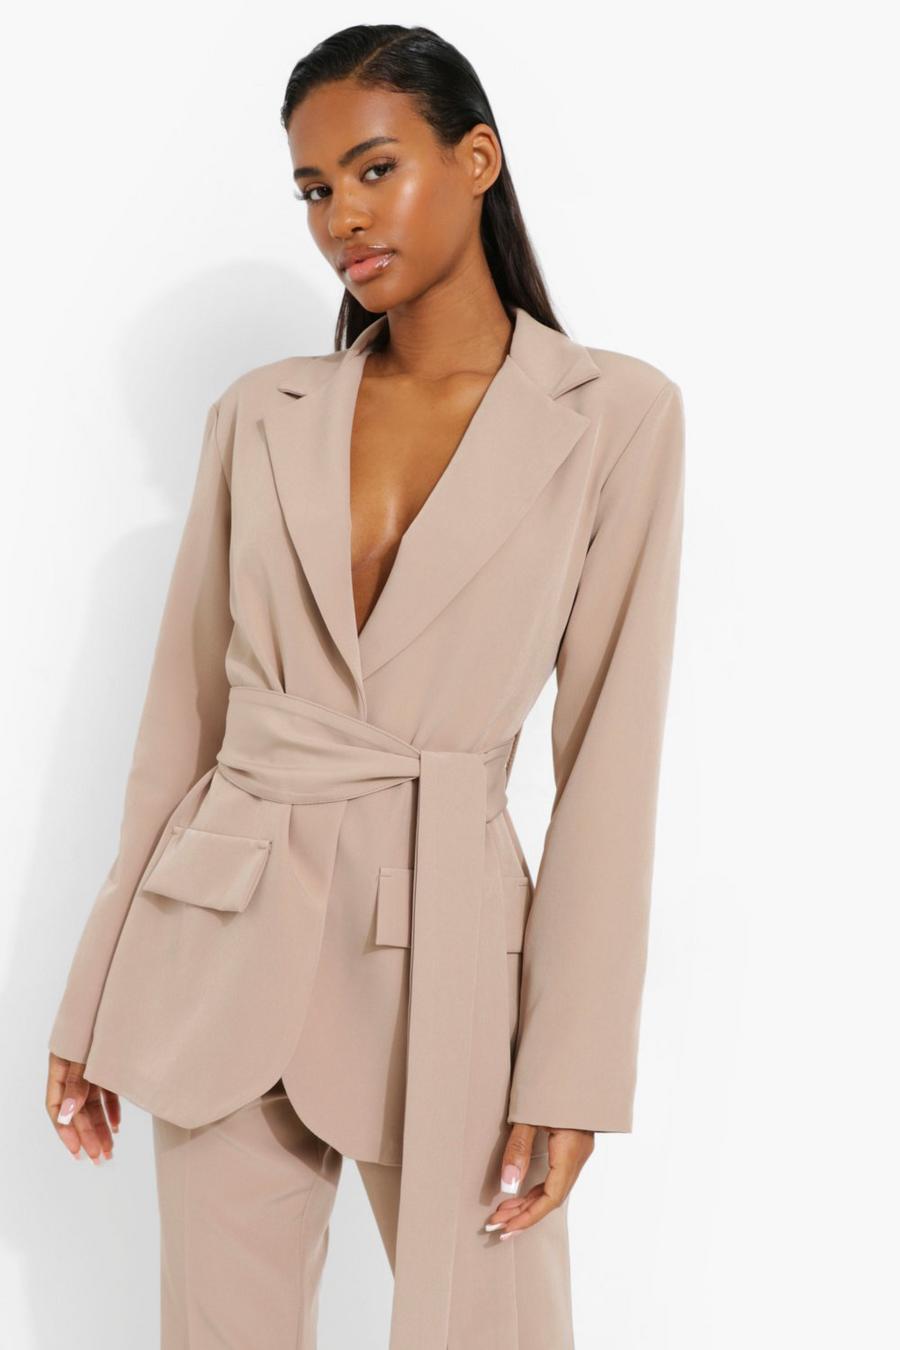 Pant Suits for Wedding Guests  Dressy Pant Suits for Wedding